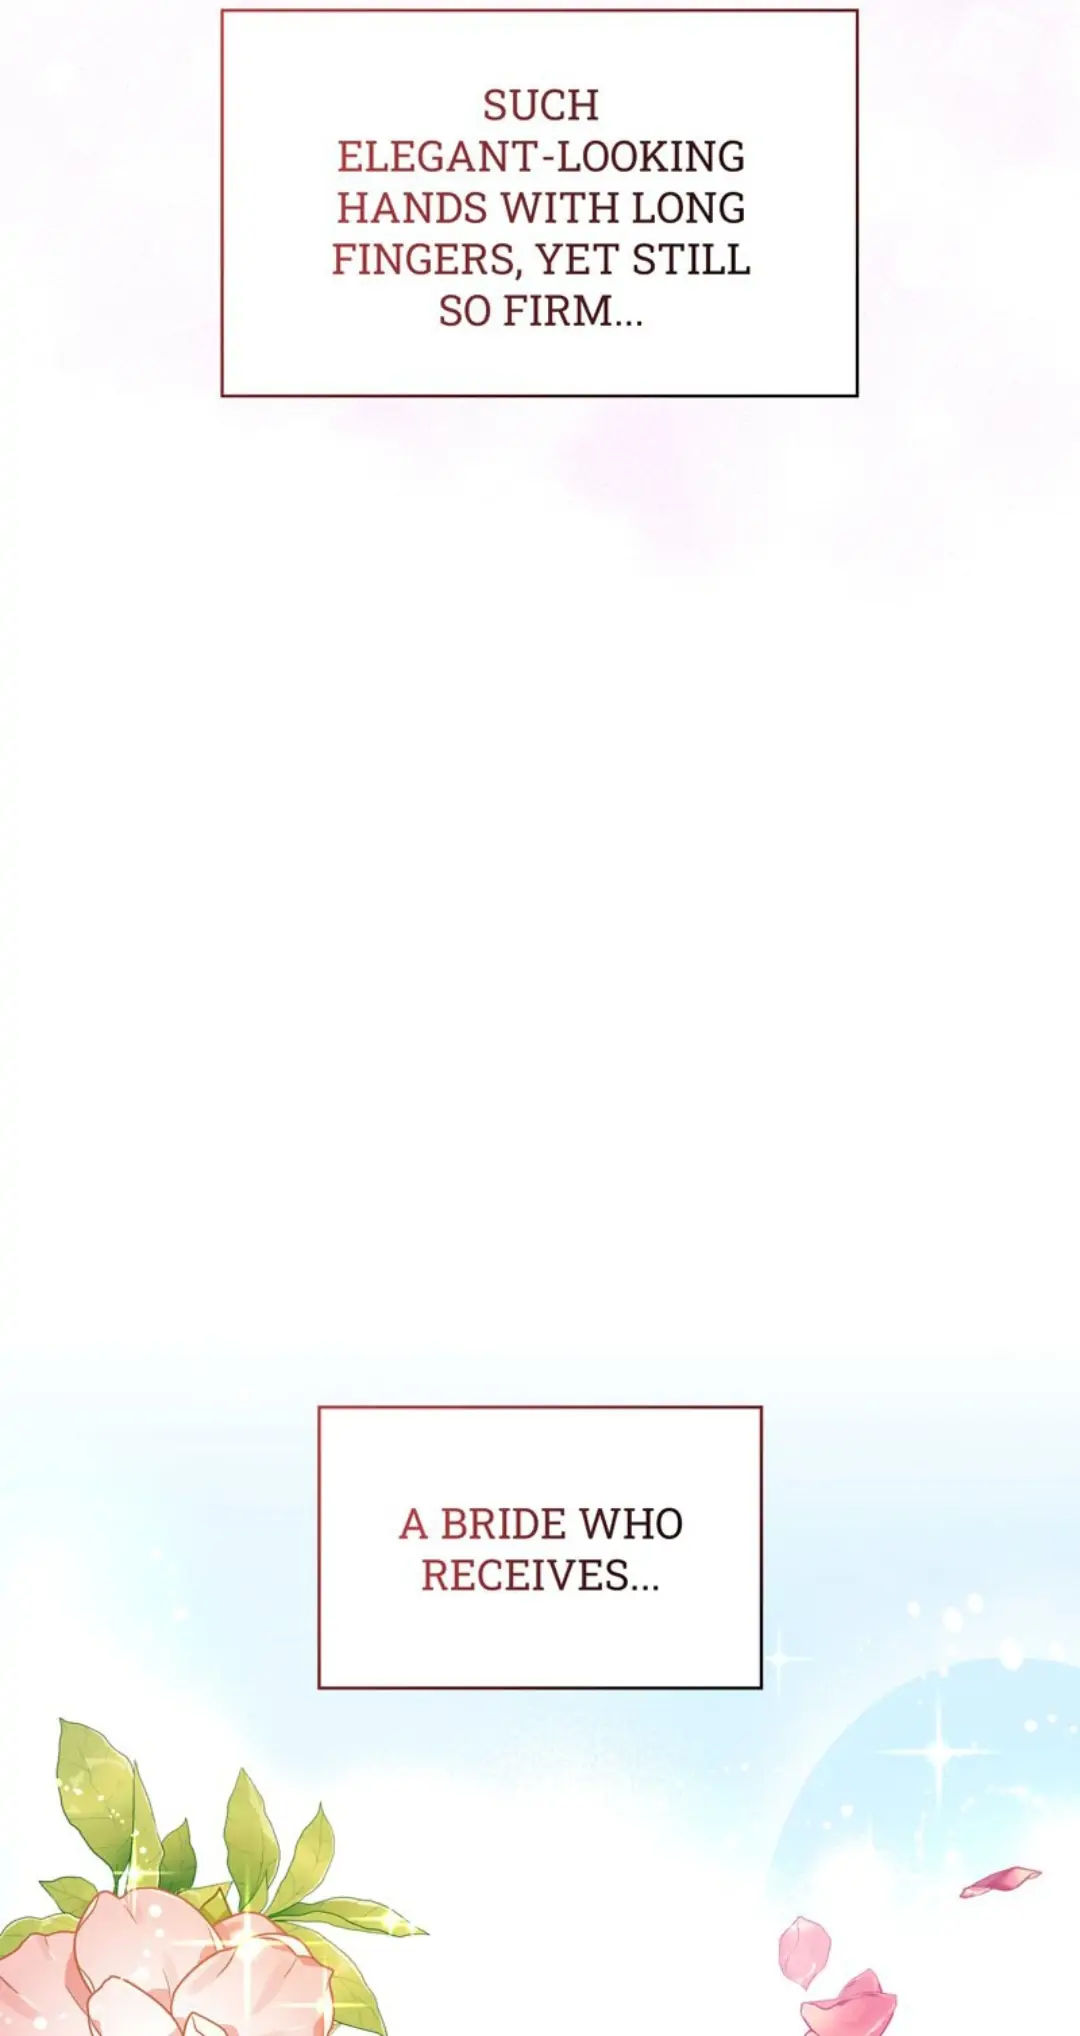 My Bosss’s Perfect Wedding chapter 1